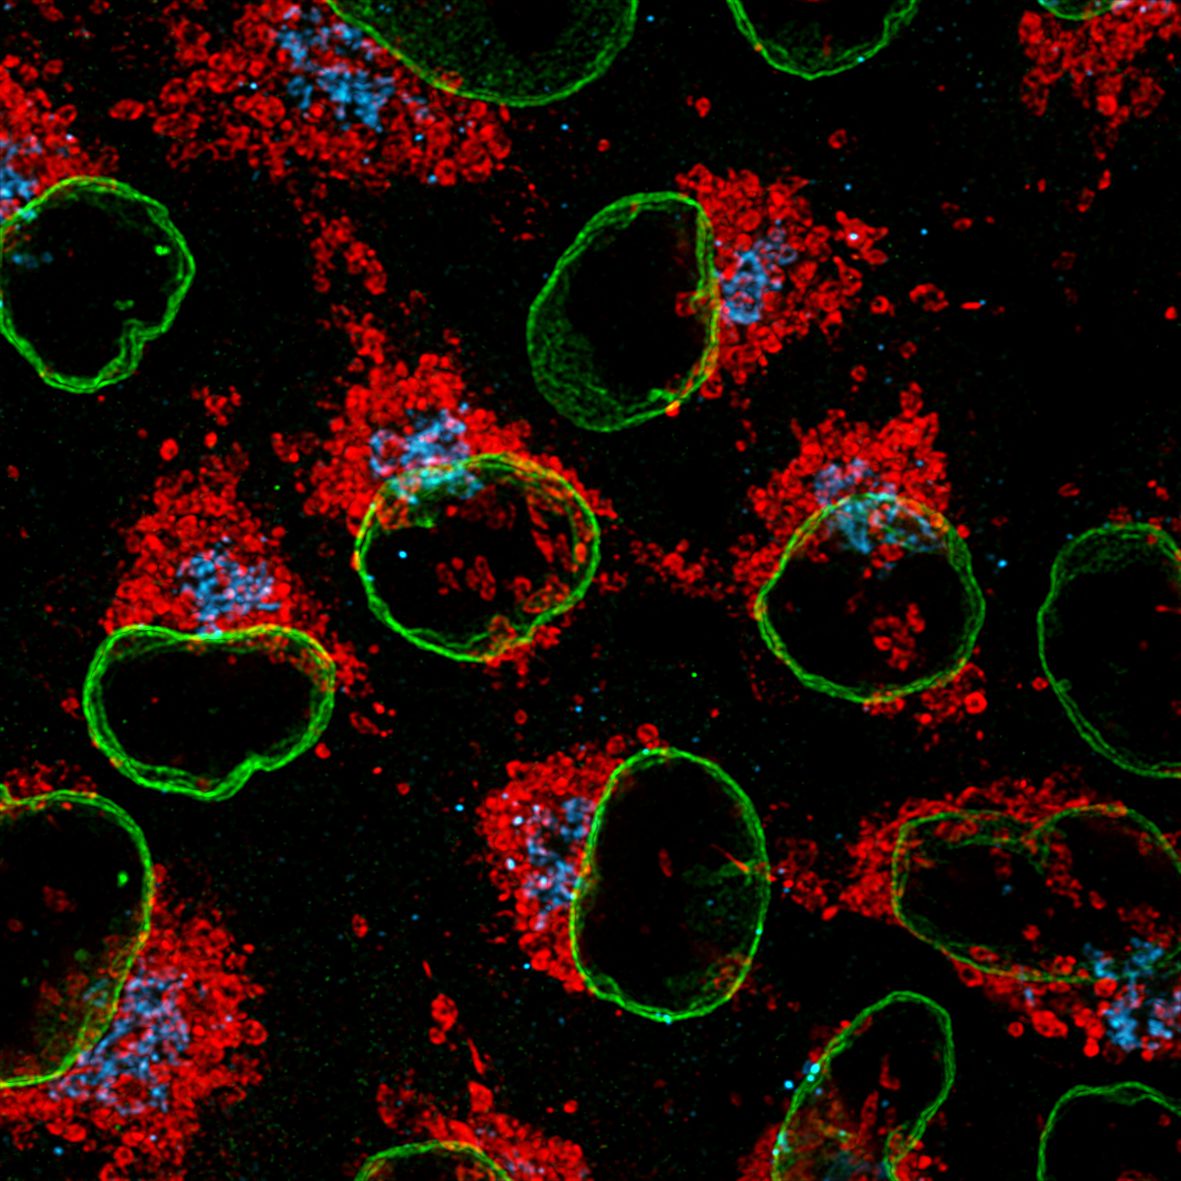 Immunofluorescence of HeLa: PFA-fixed HeLa cells were stained with anti-Ki67 labeled with FlexAble CoraLite® 488 Kit (KFA021, green) and anti-Tubulin alpha labeled with FlexAble CoraLite® Plus 650 Kit (KFA023, magenta).​ Epifluorescence images were acquired with a 20x objective and post-processed.